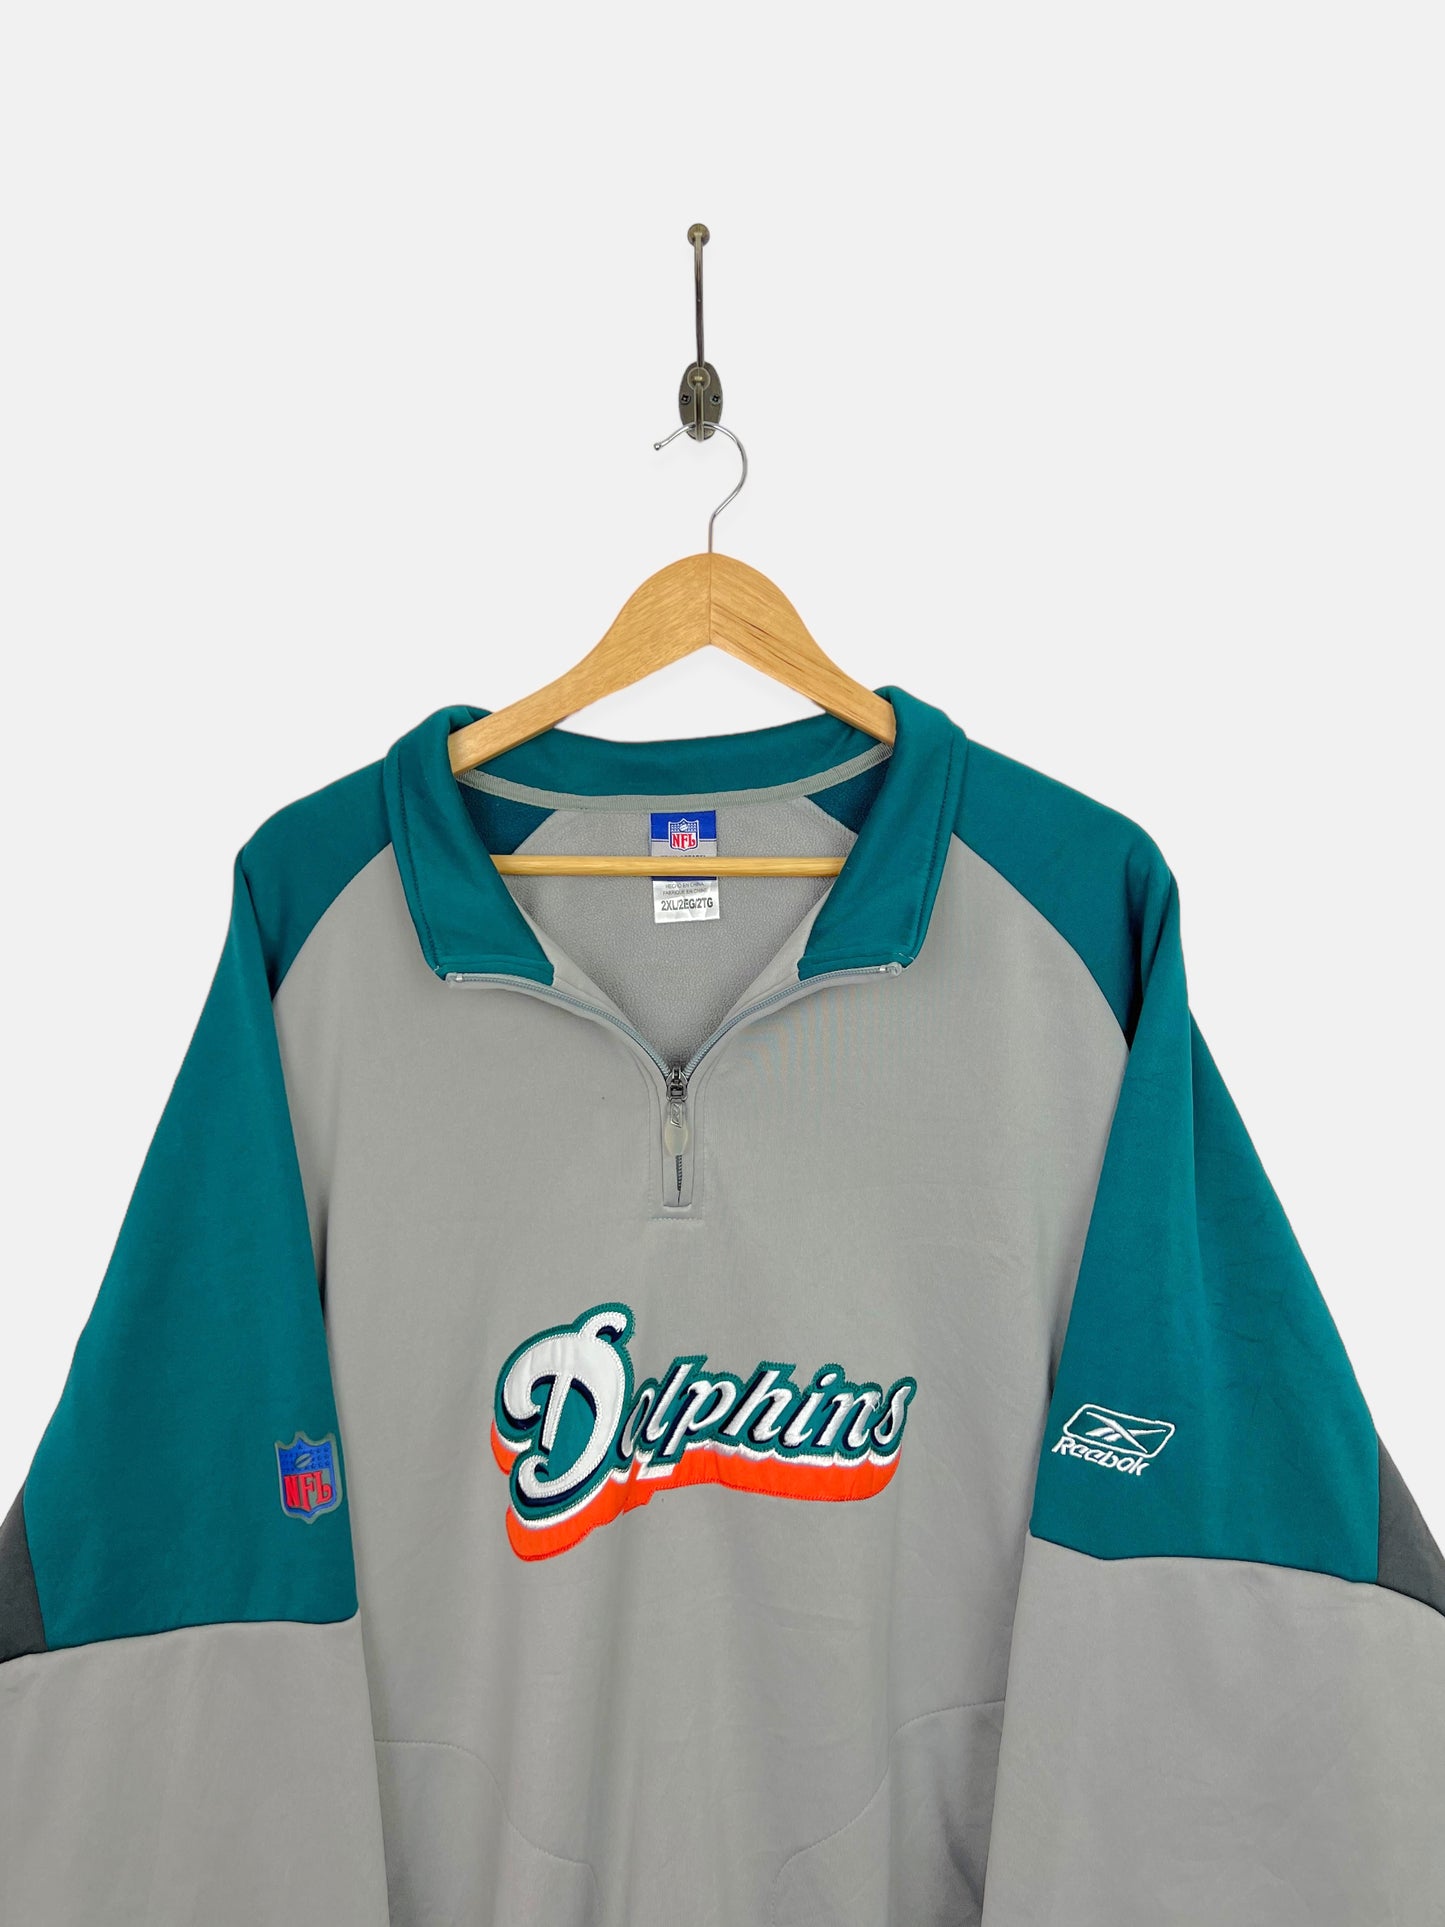 90's Miami Dolphins Reebok Embroidered Vintage Fleece Lined Jacket Size XL-2XL